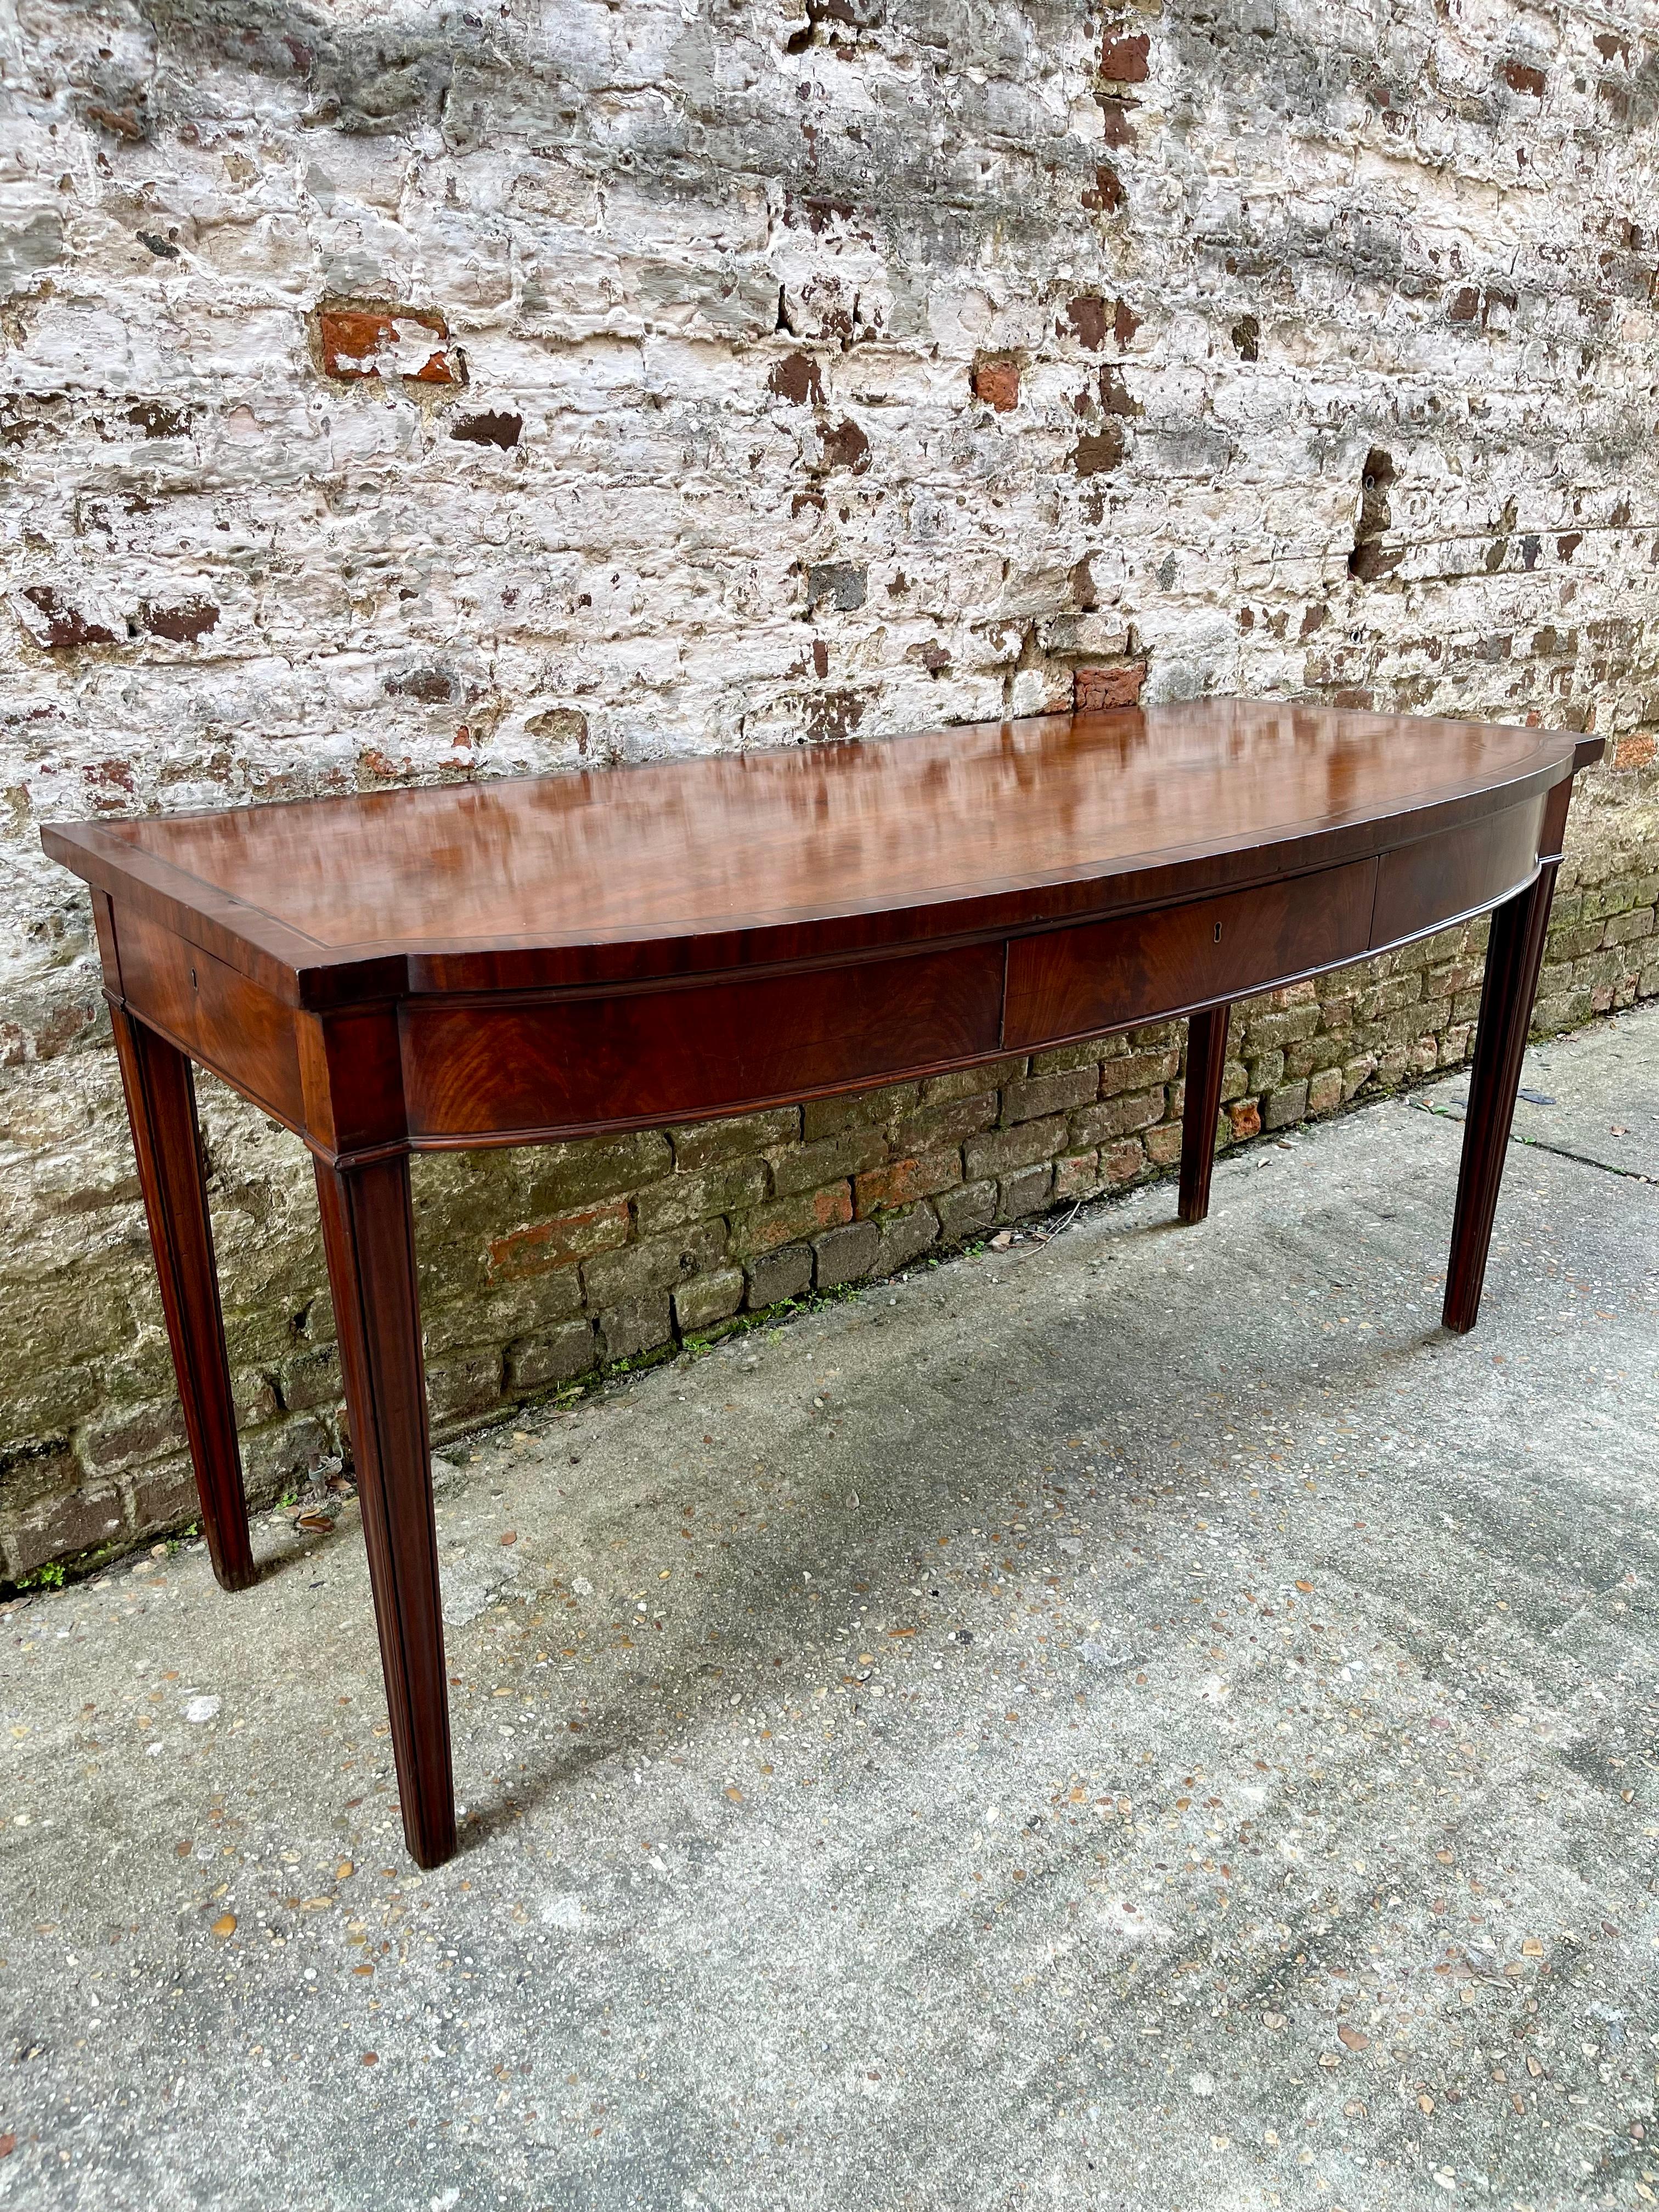 Mahogany server with tapered legs, front and two side drawers. Cross banding on top.